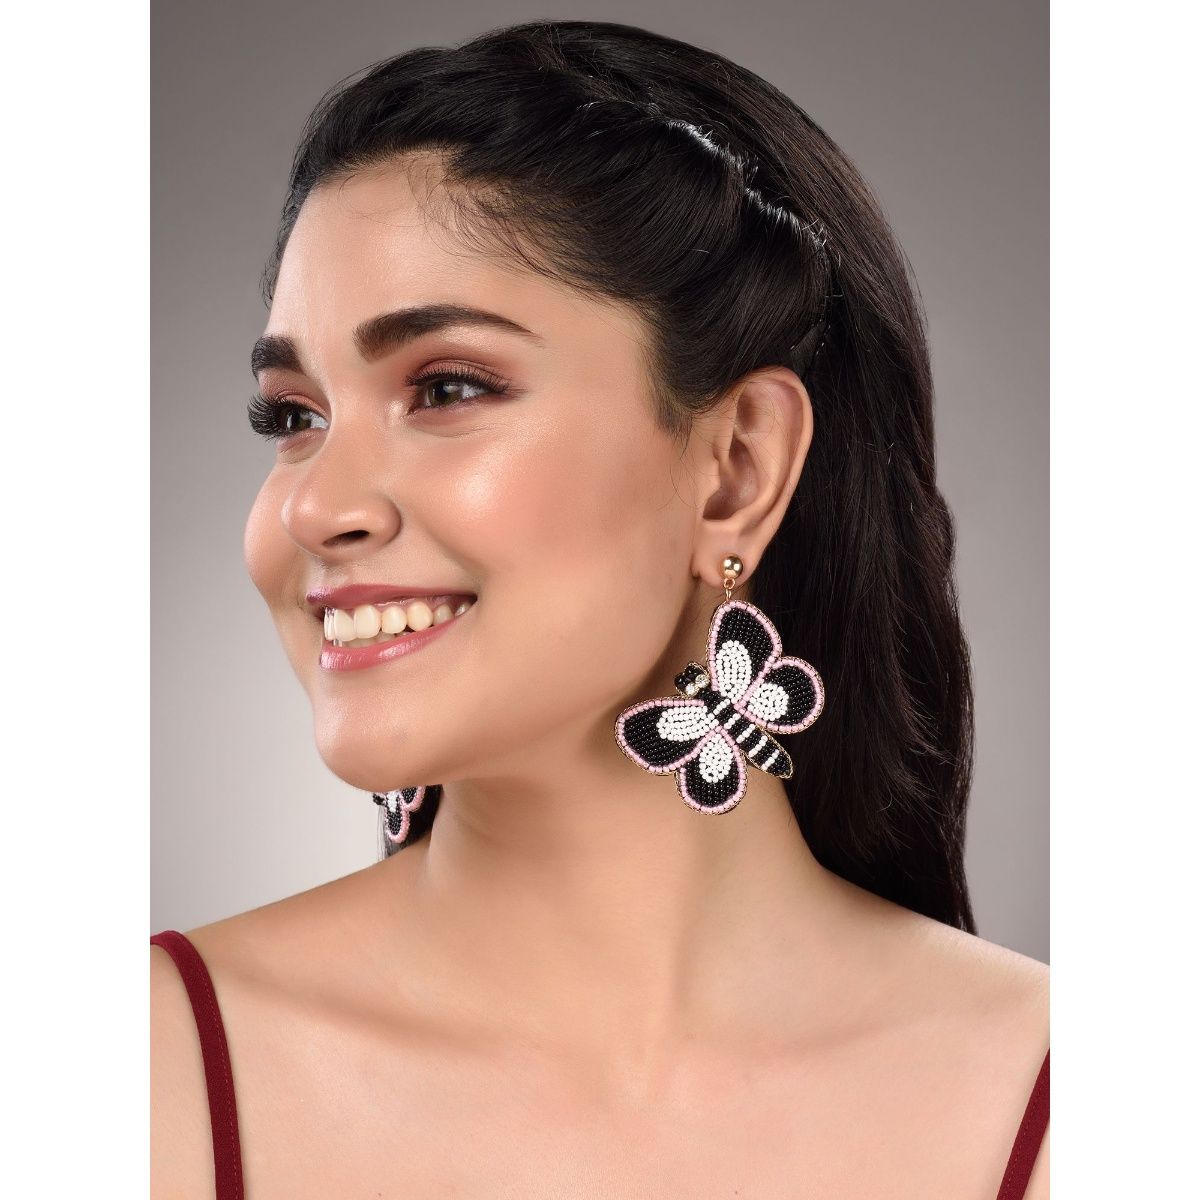 Get Black Pink and White Beaded Western Handmade Earrings at  440  LBB  Shop